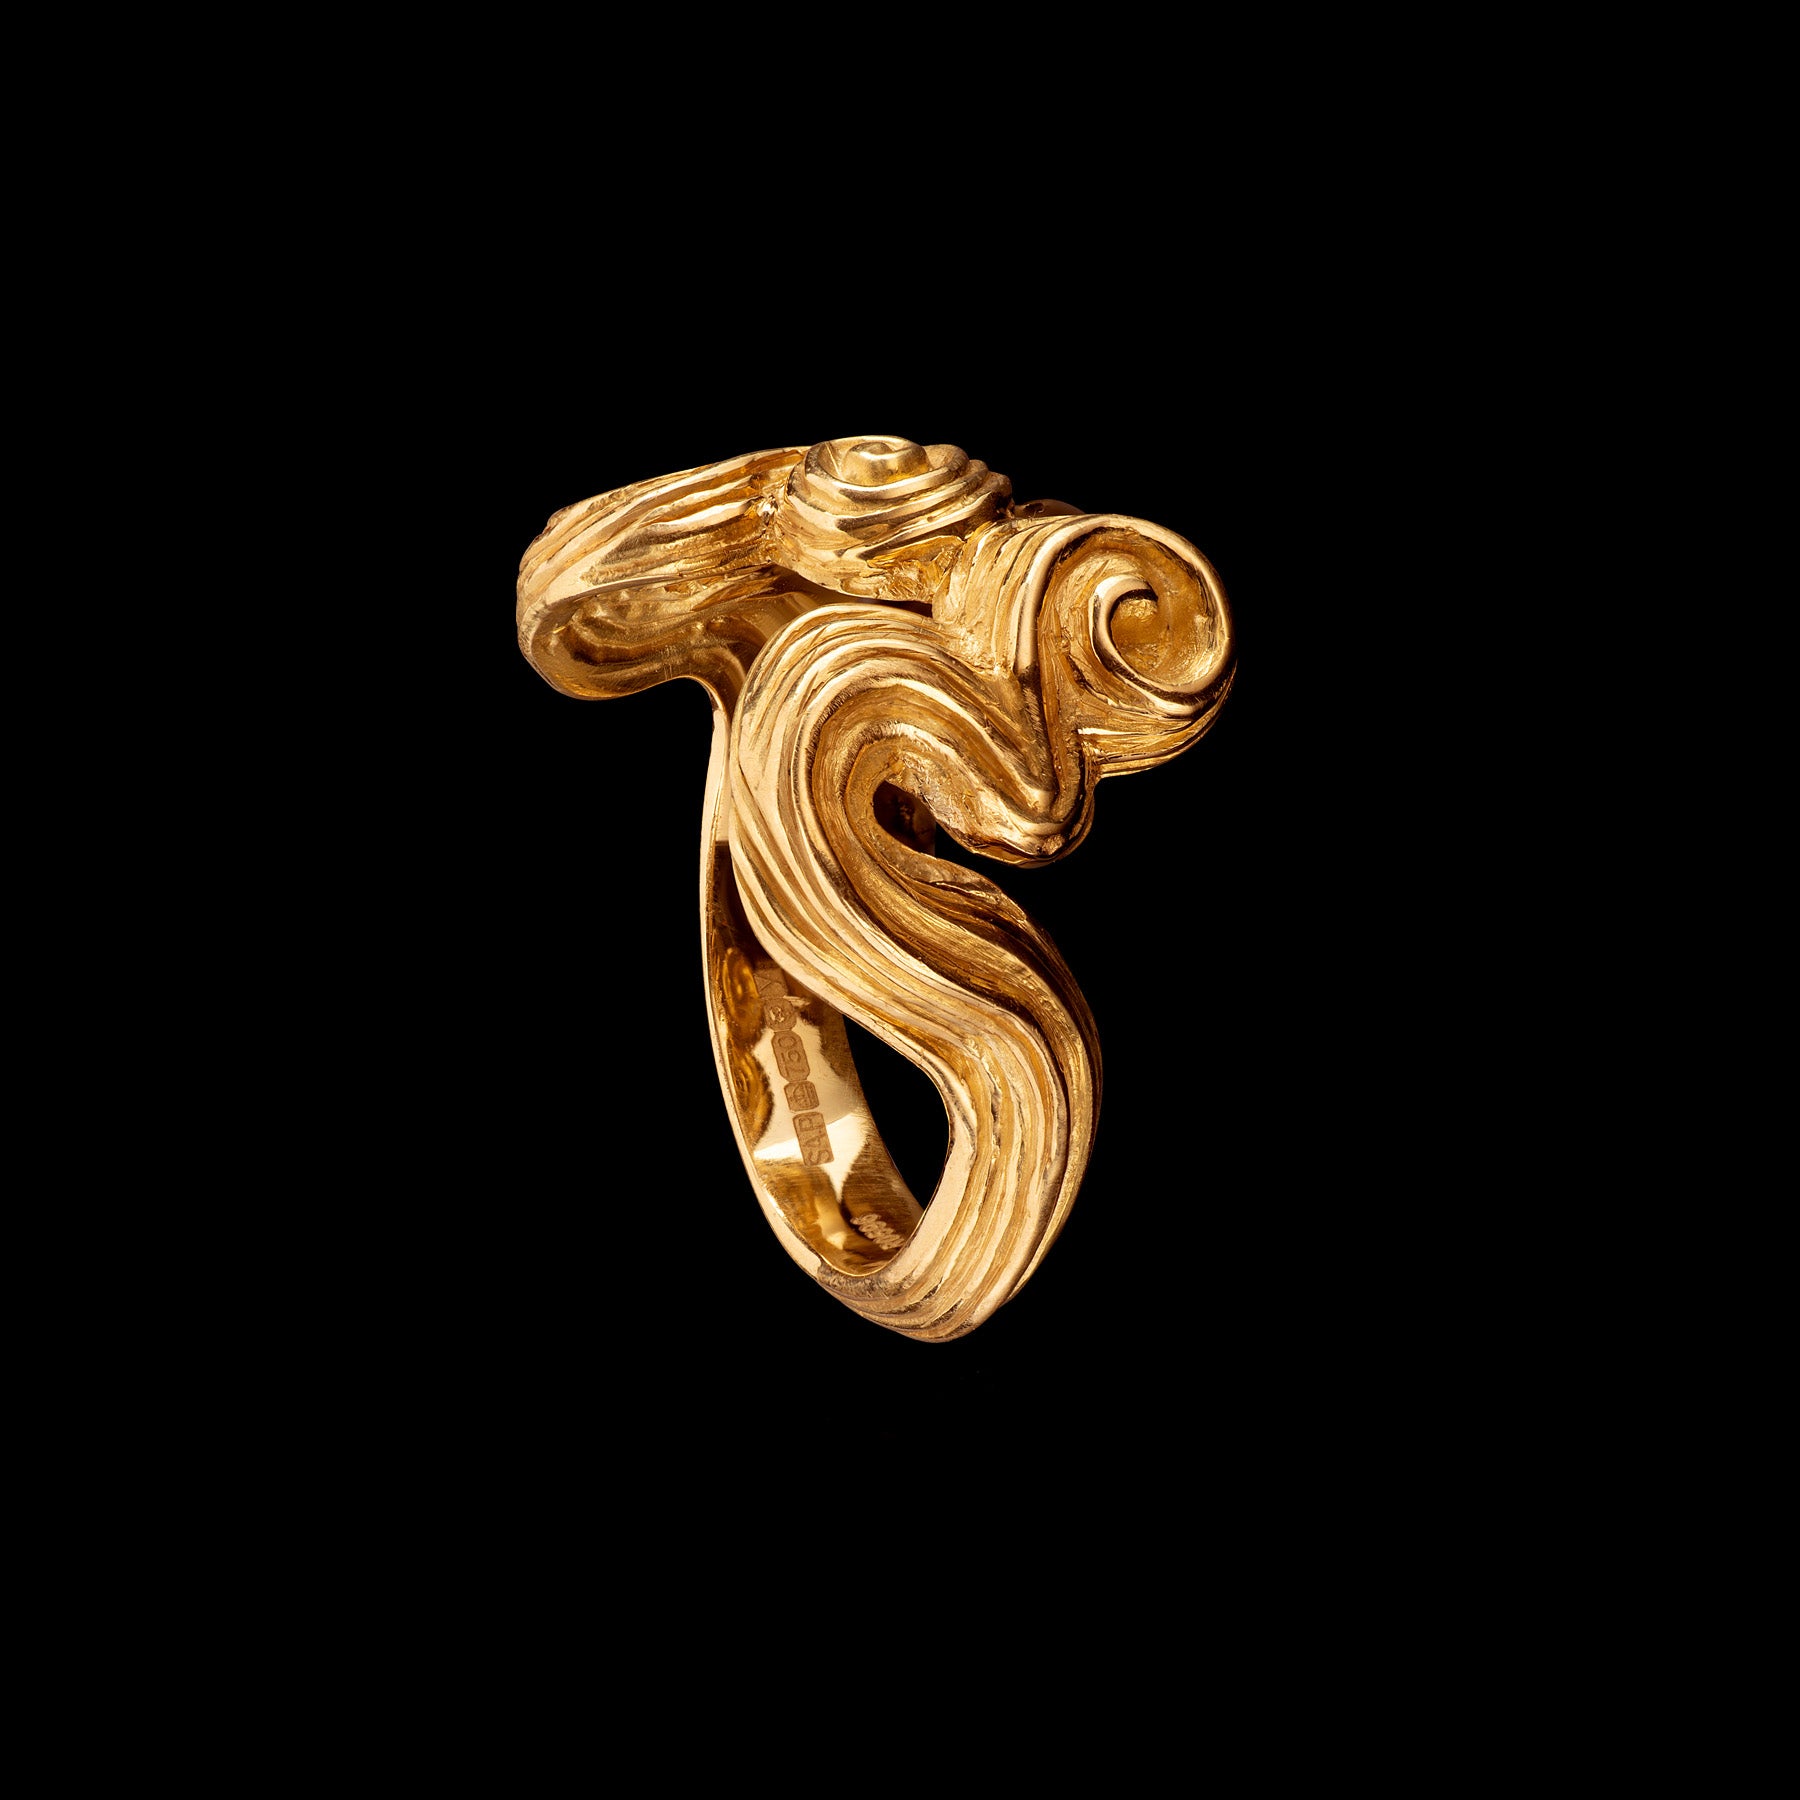 The lock ring by Solange Azagury-Partridge - 18 karat yellow gold form - front view 1